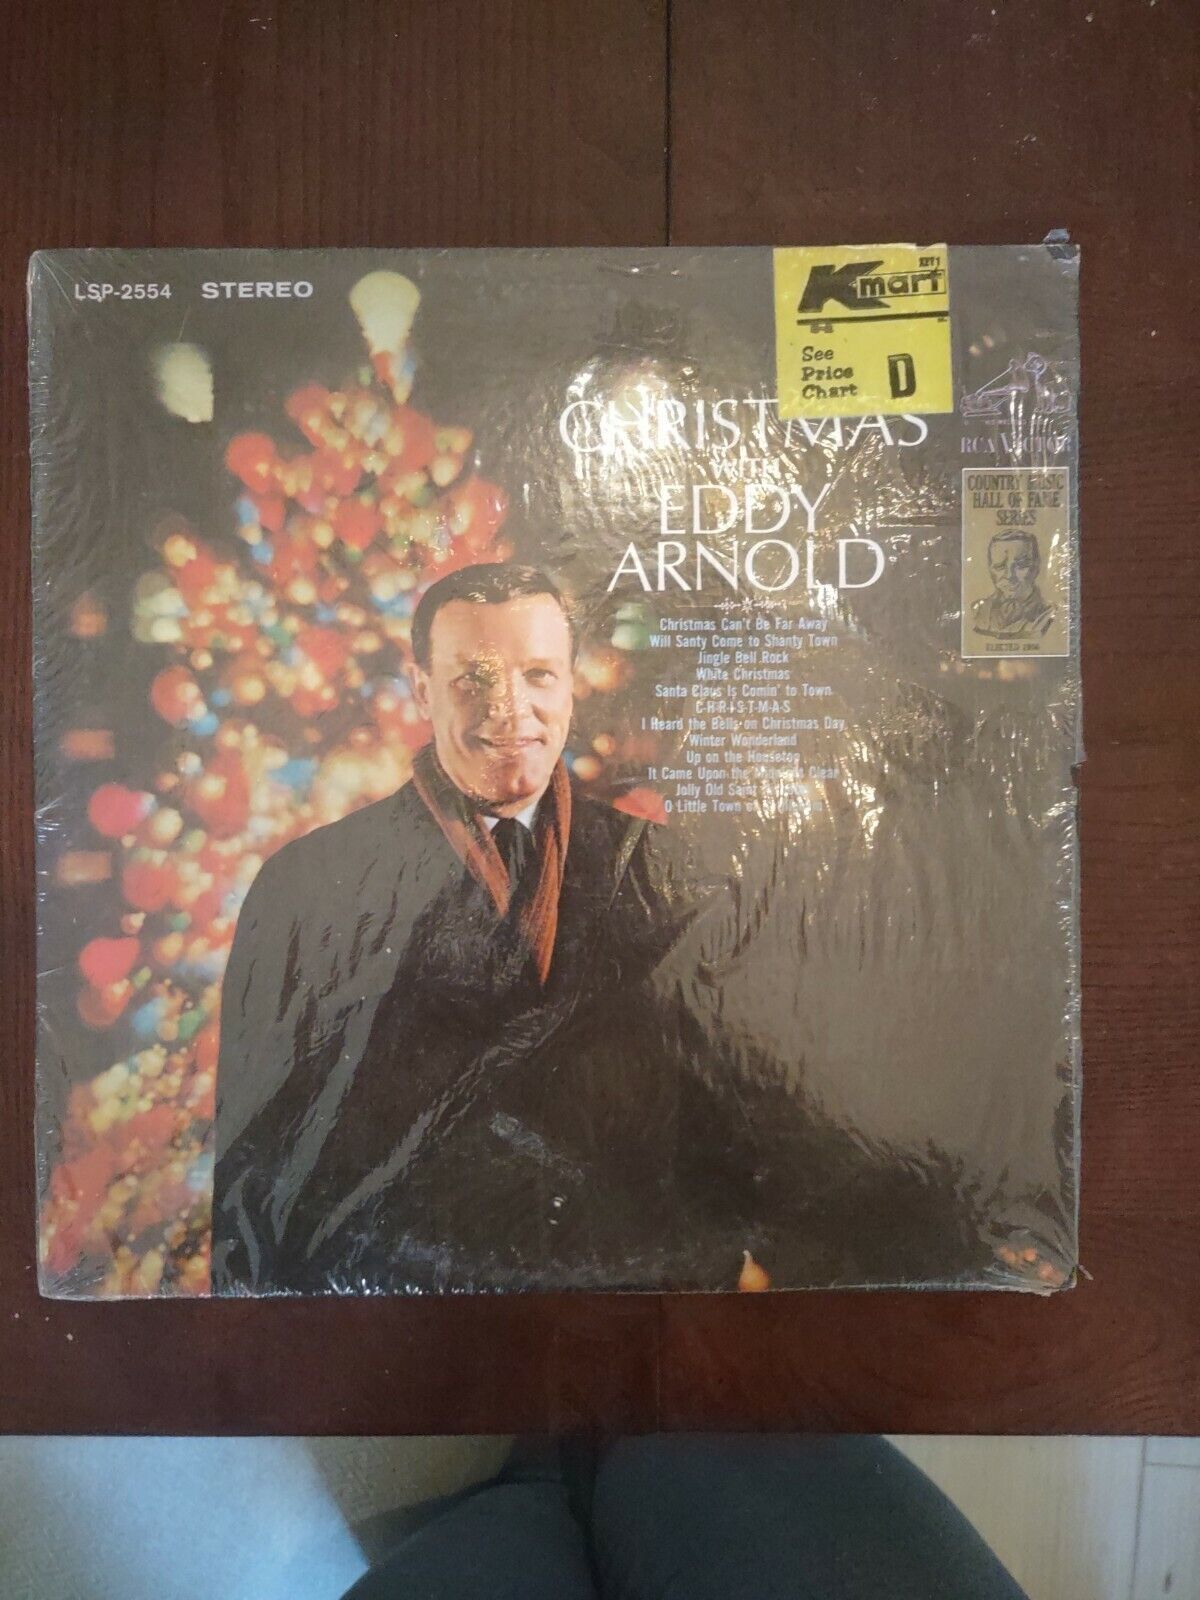 Primary image for Christmas With Eddy Arnold Album